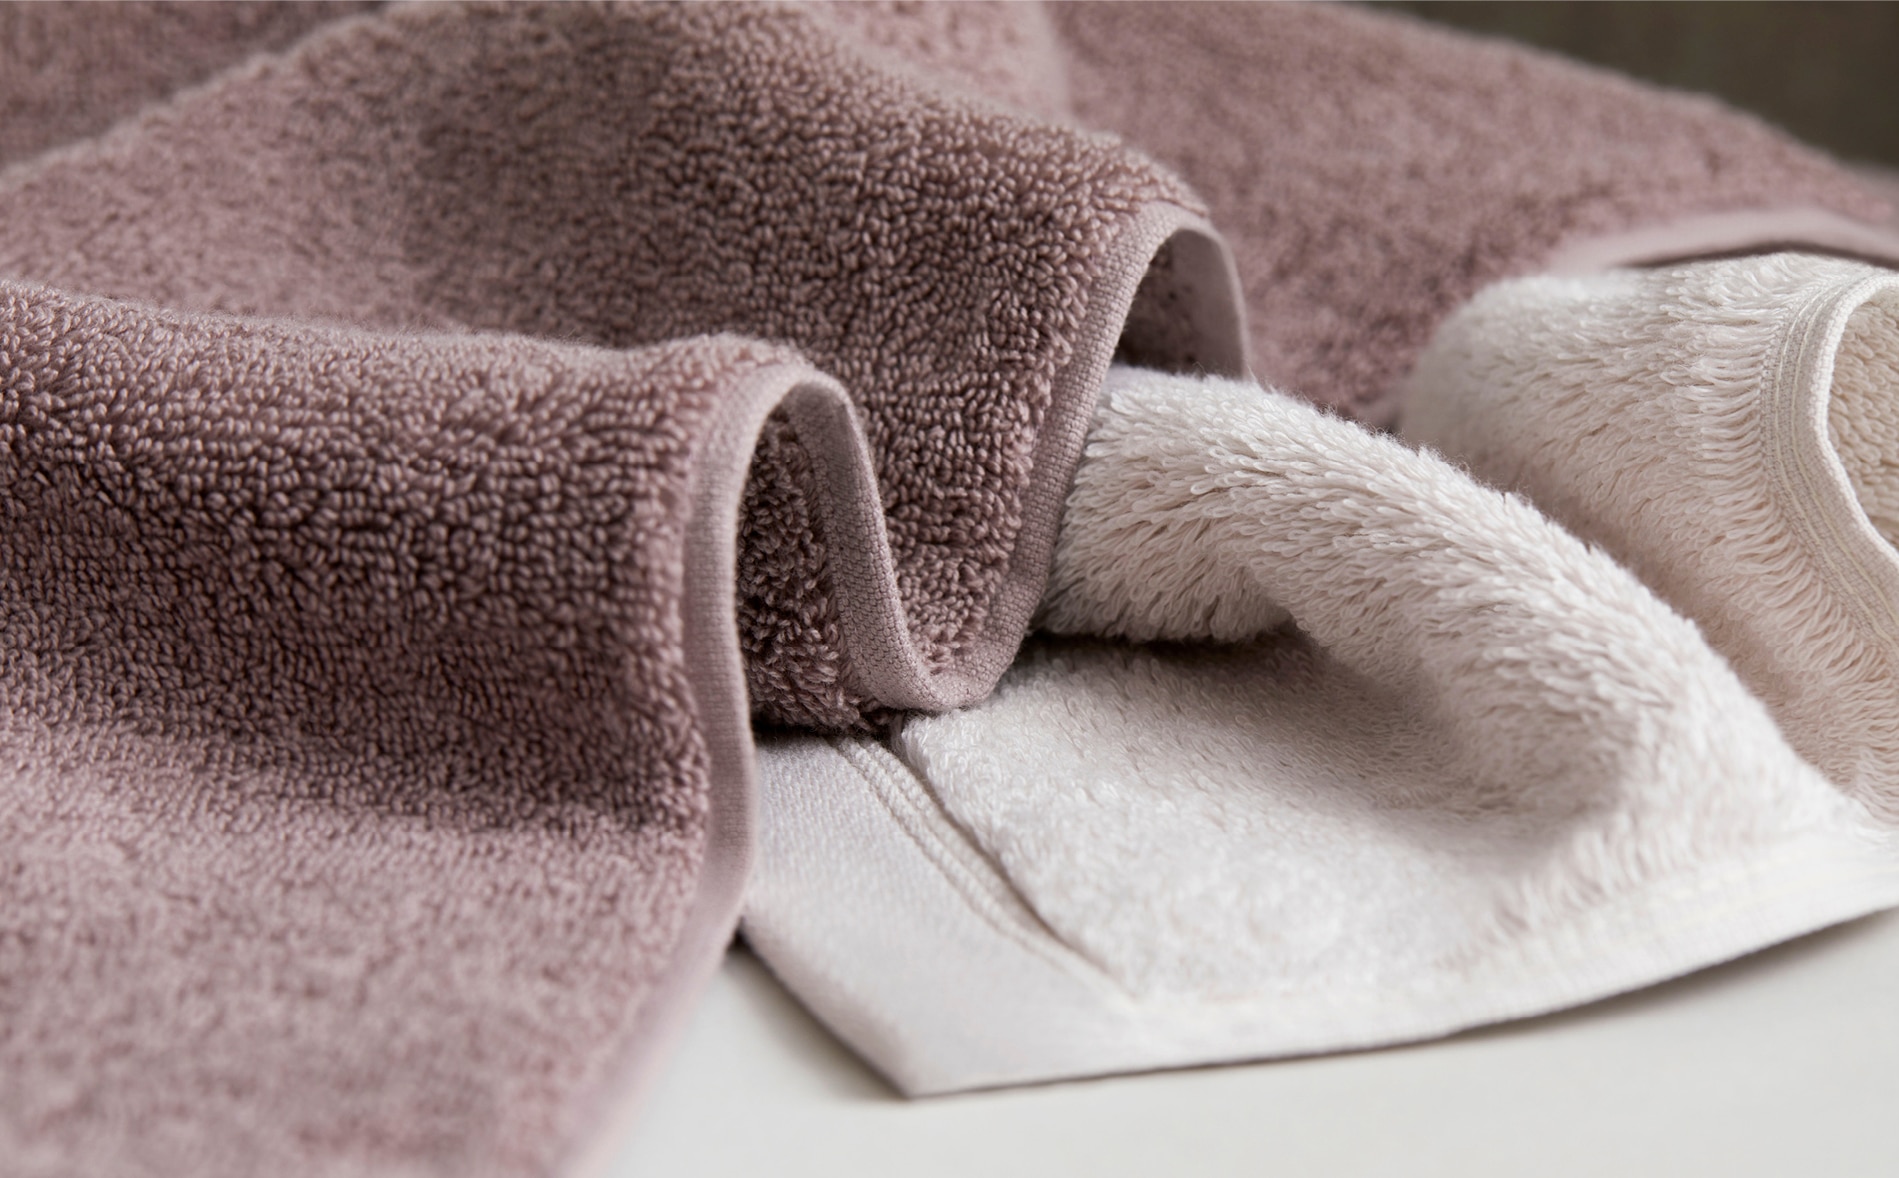 sheridan bath towels casually rumpled, in lavendar and white shades